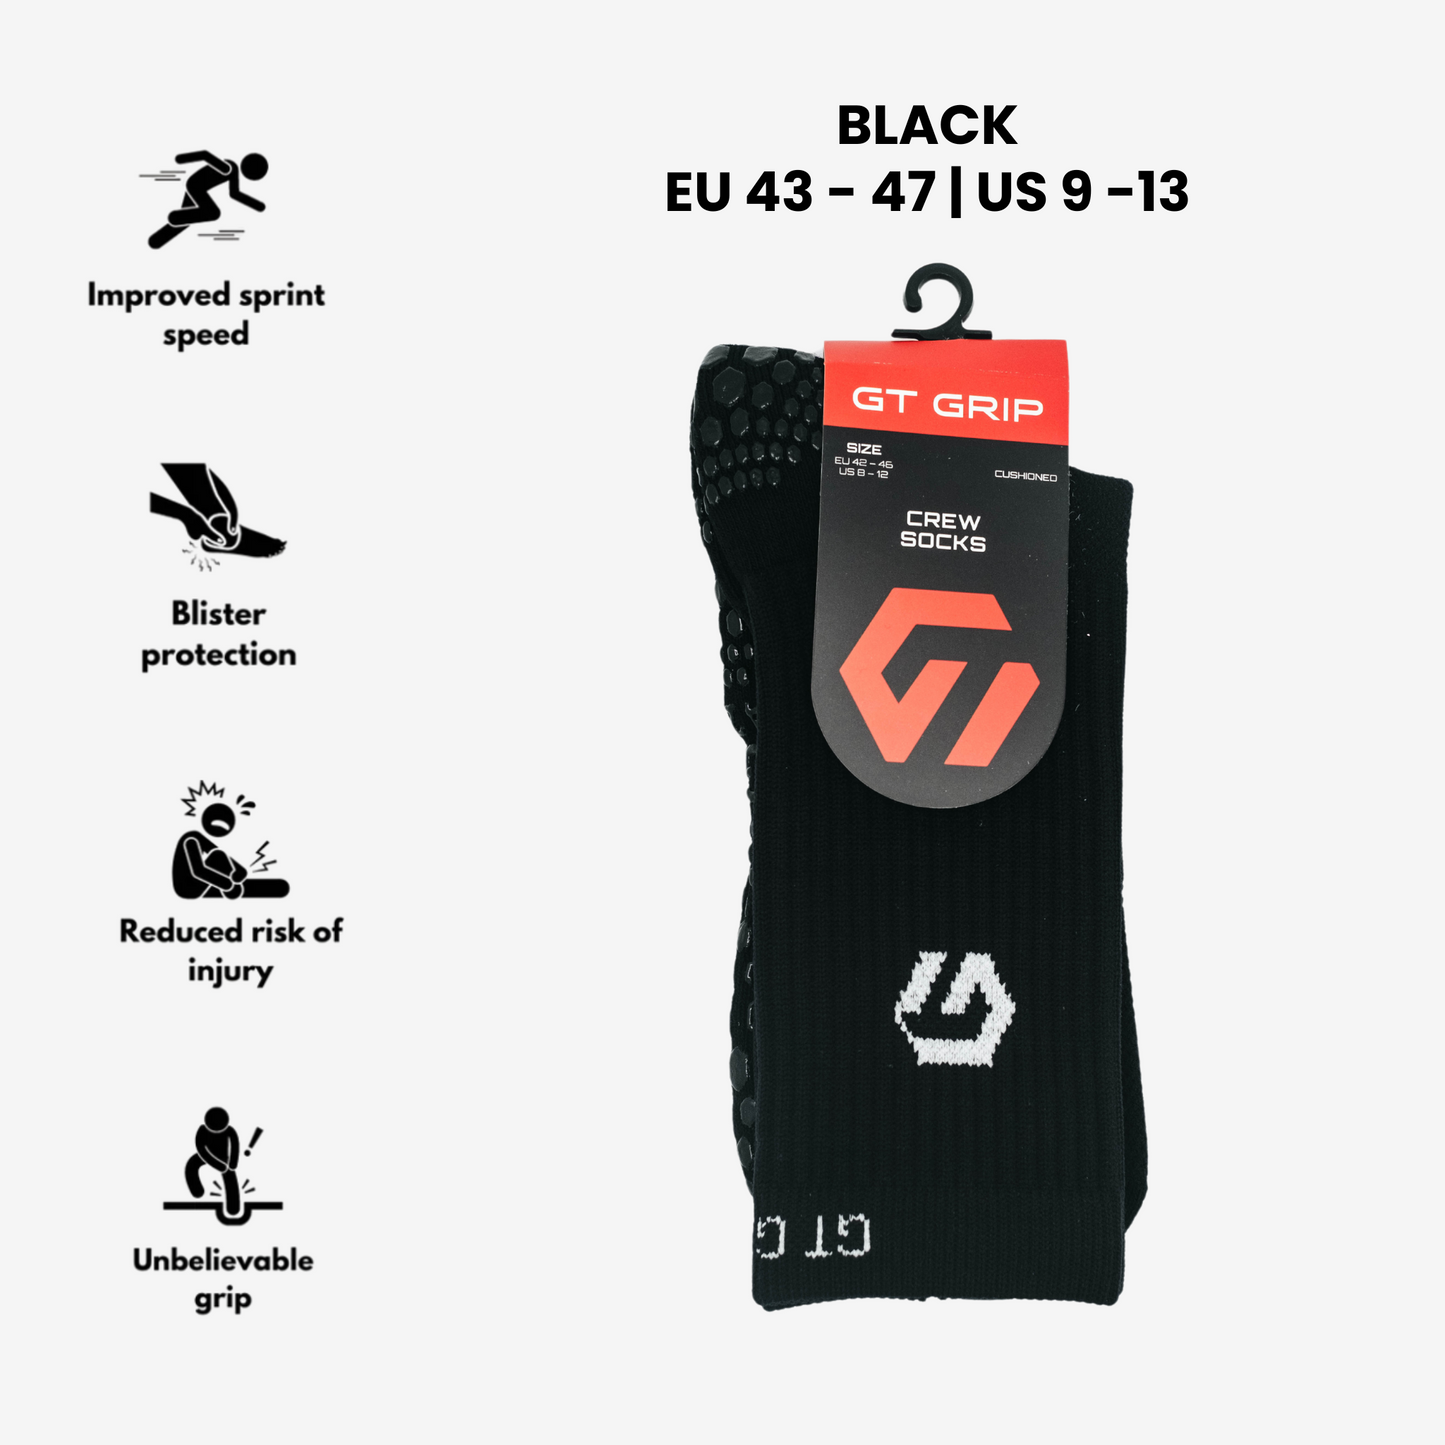 Black GT GRIP Performance Socks, Size EU 43-47 | US 9-13, for superior stability, anti-blisters, and optimal traction.